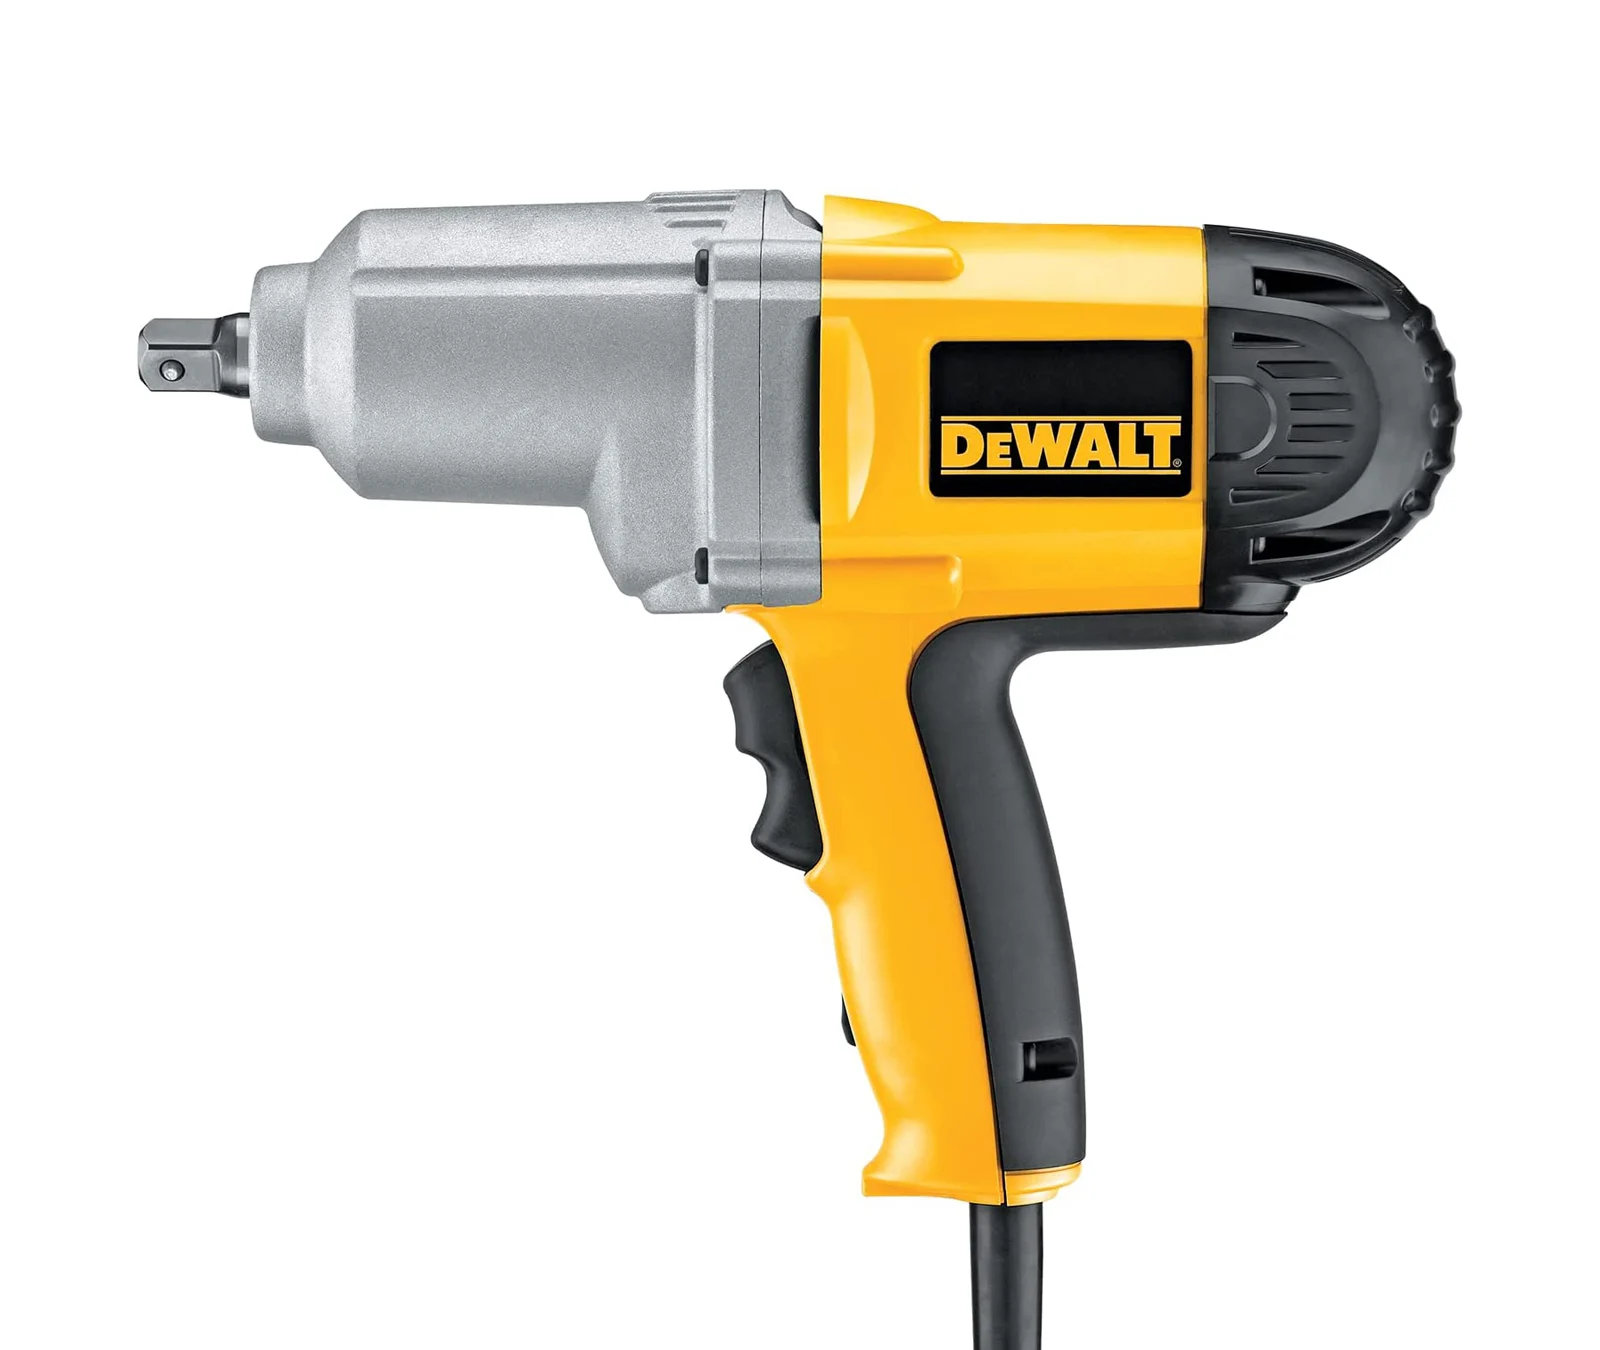 Corded impact driver